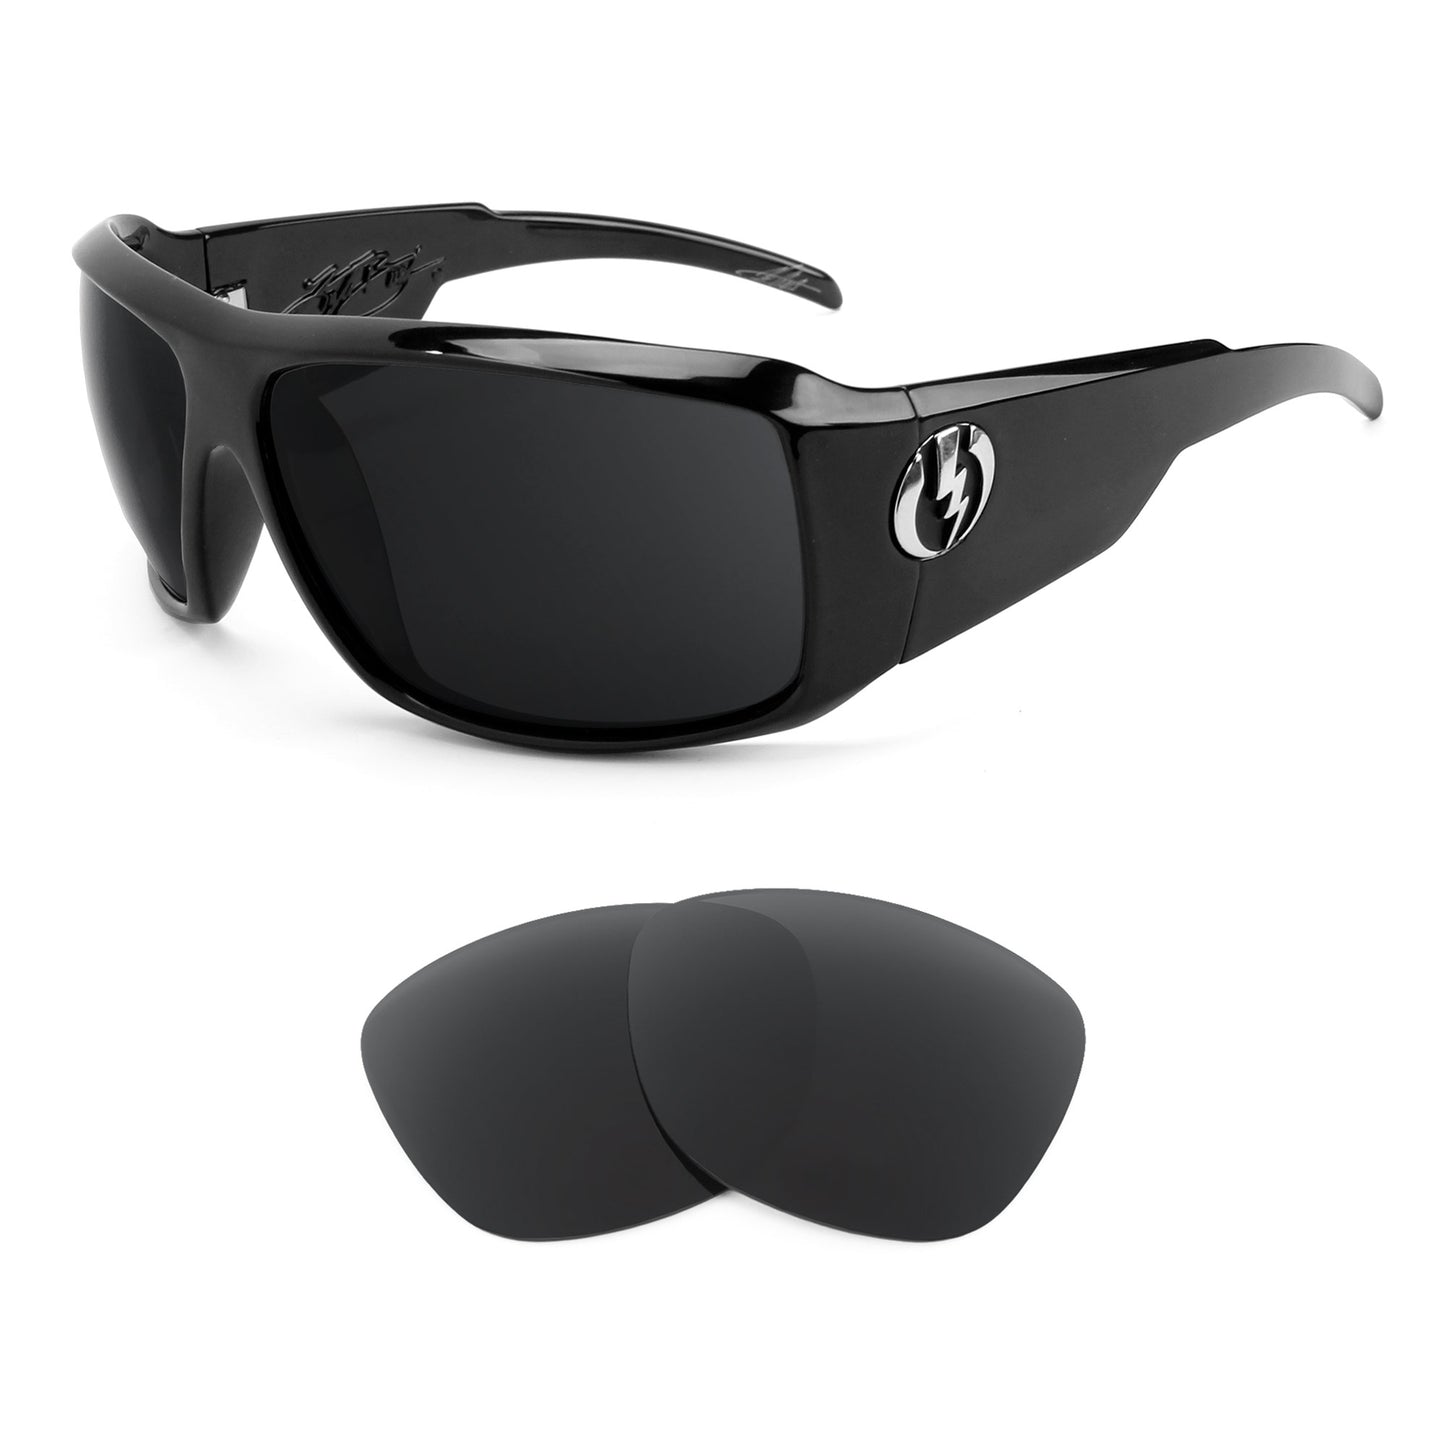 Electric KB1 sunglasses with replacement lenses